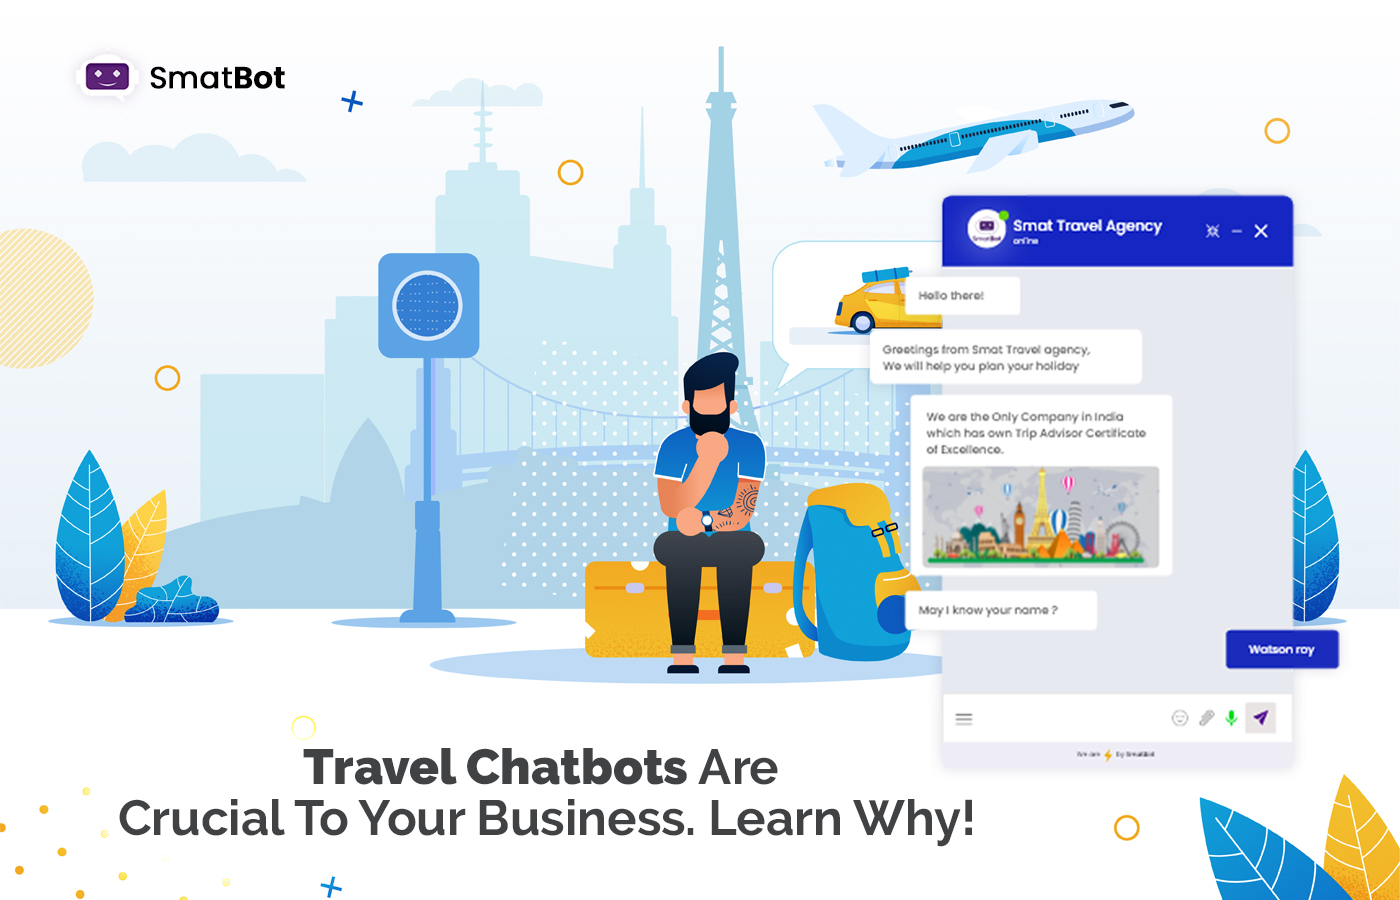 Travel Chatbots Are Crucial To Your Business. Learn Why!